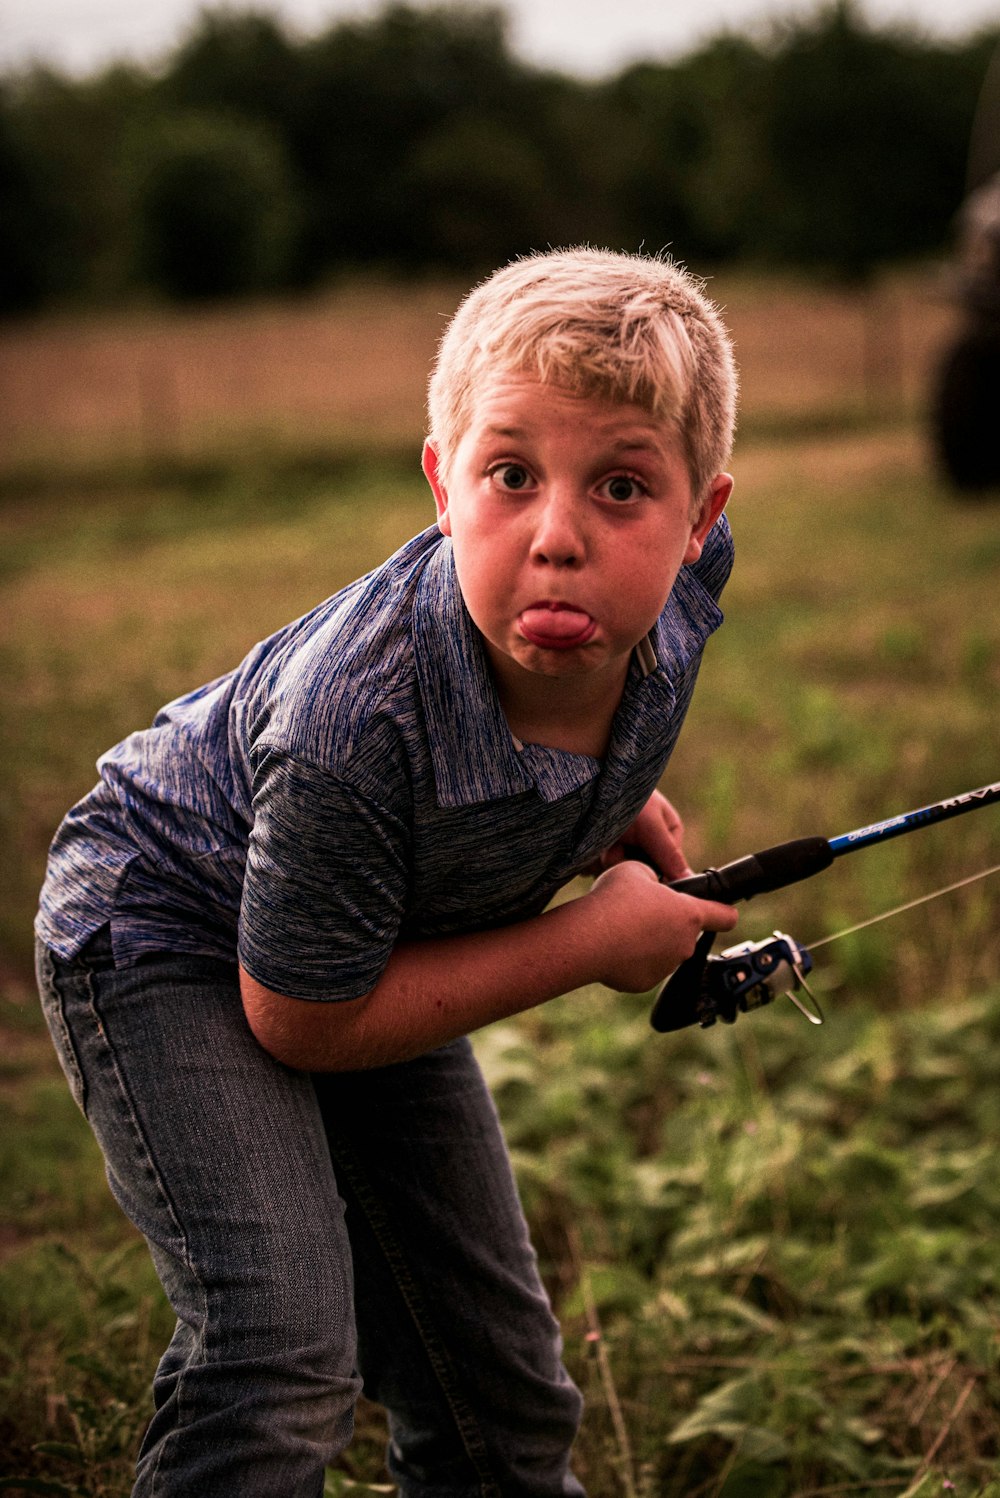 boy in gray and black stripe polo shirt and blue denim jeans holding black fishing rod